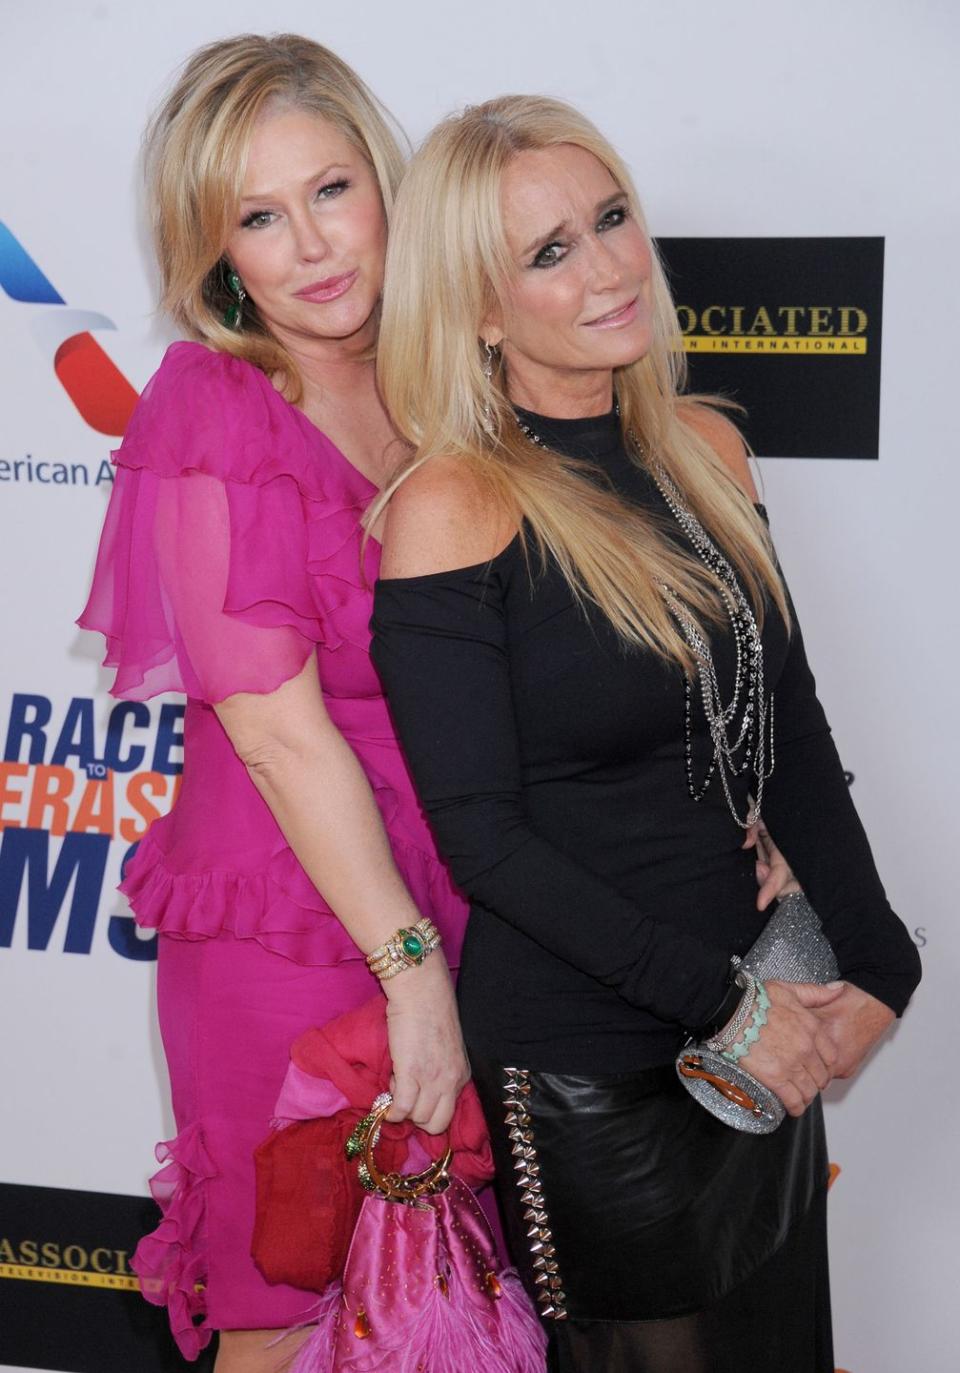 <p>Kathy Hilton is the oldest of the Richards sisters (their third sister is <em>Real Housewives of Beverly Hills </em>star Kyle Richards) and we see the most similarities between her and former child actress, Kim. From their nose to their coloring, the two are nearly identical despite being six years apart. </p>